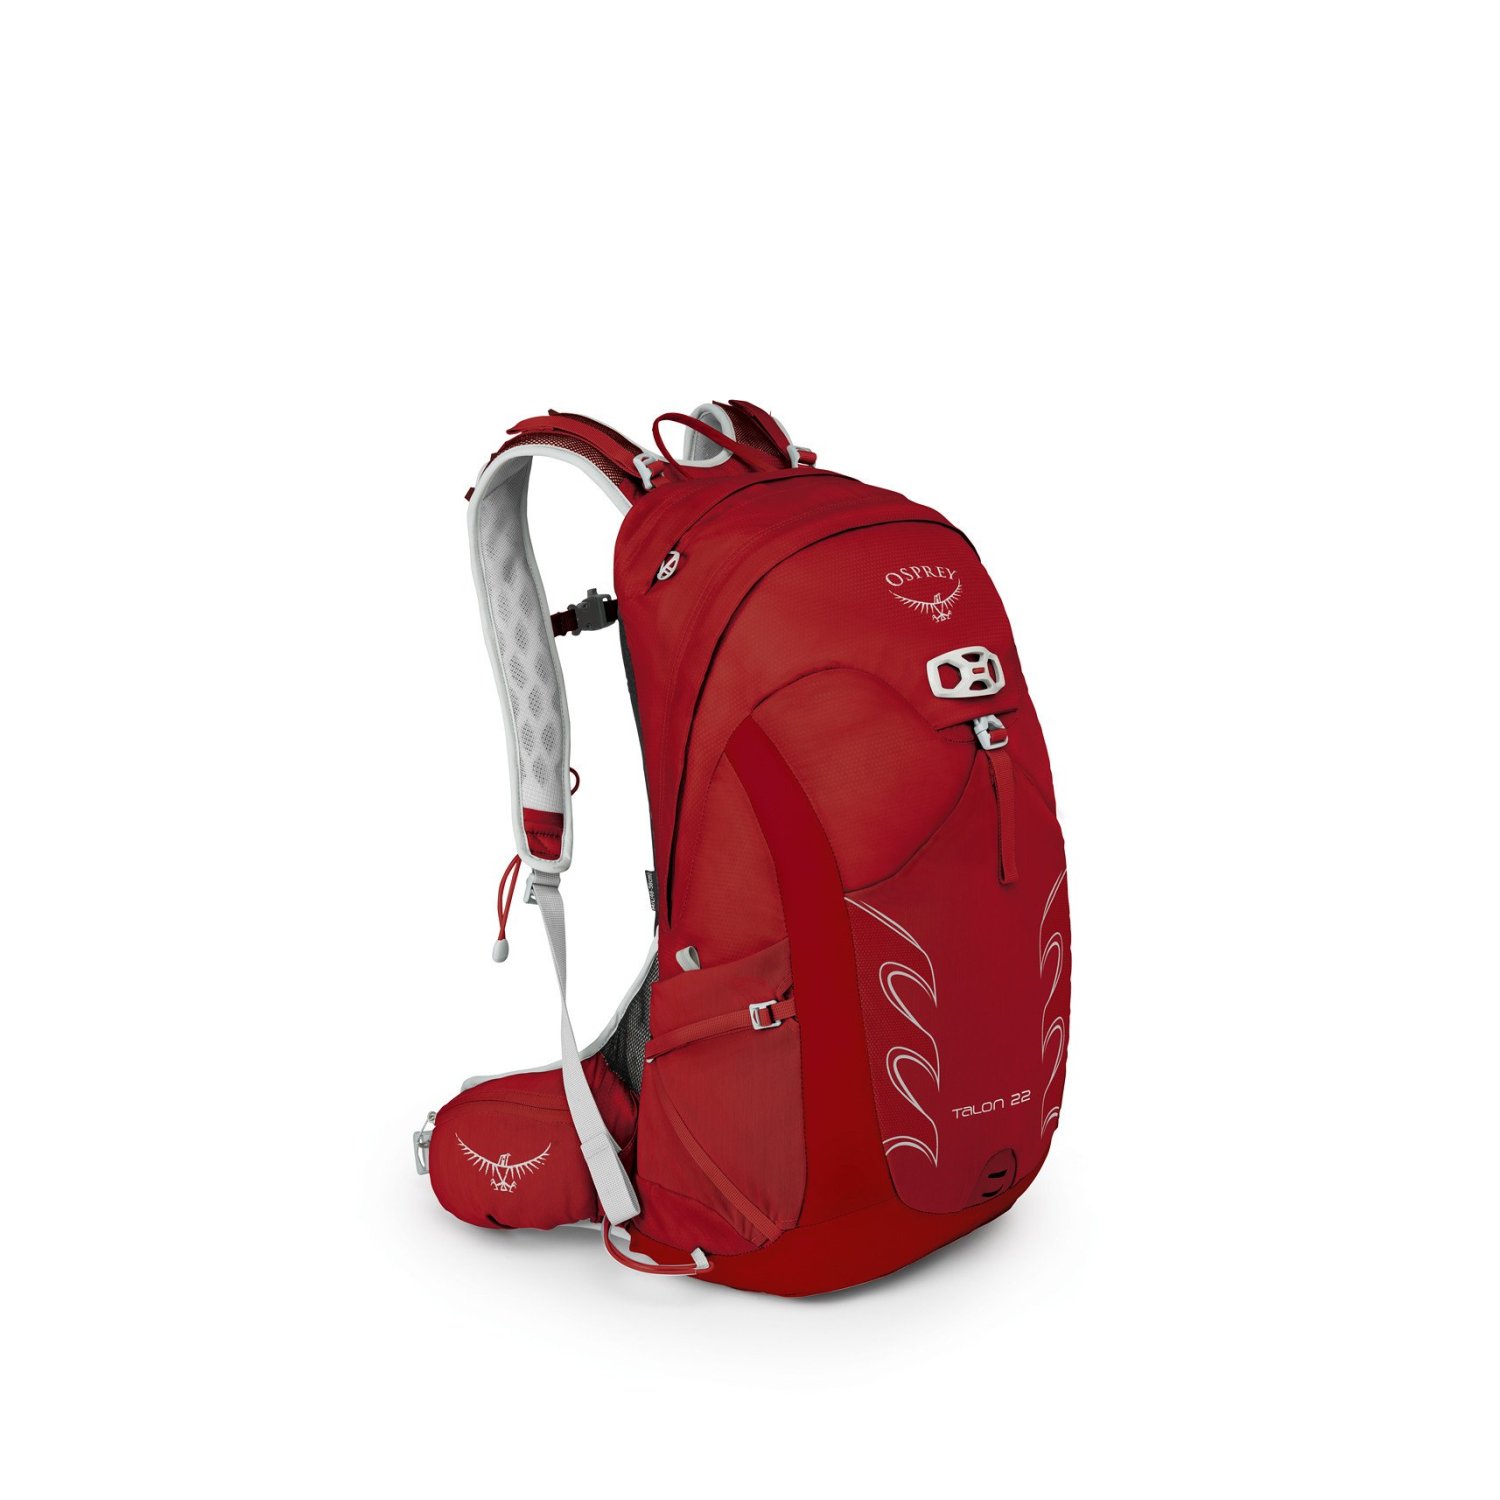 routine Top Fictief Osprey Talon 22 Backpack - Medium/Large - Men's Day Hiking - Adventure  Racing (Martian Red) - Seager Inc